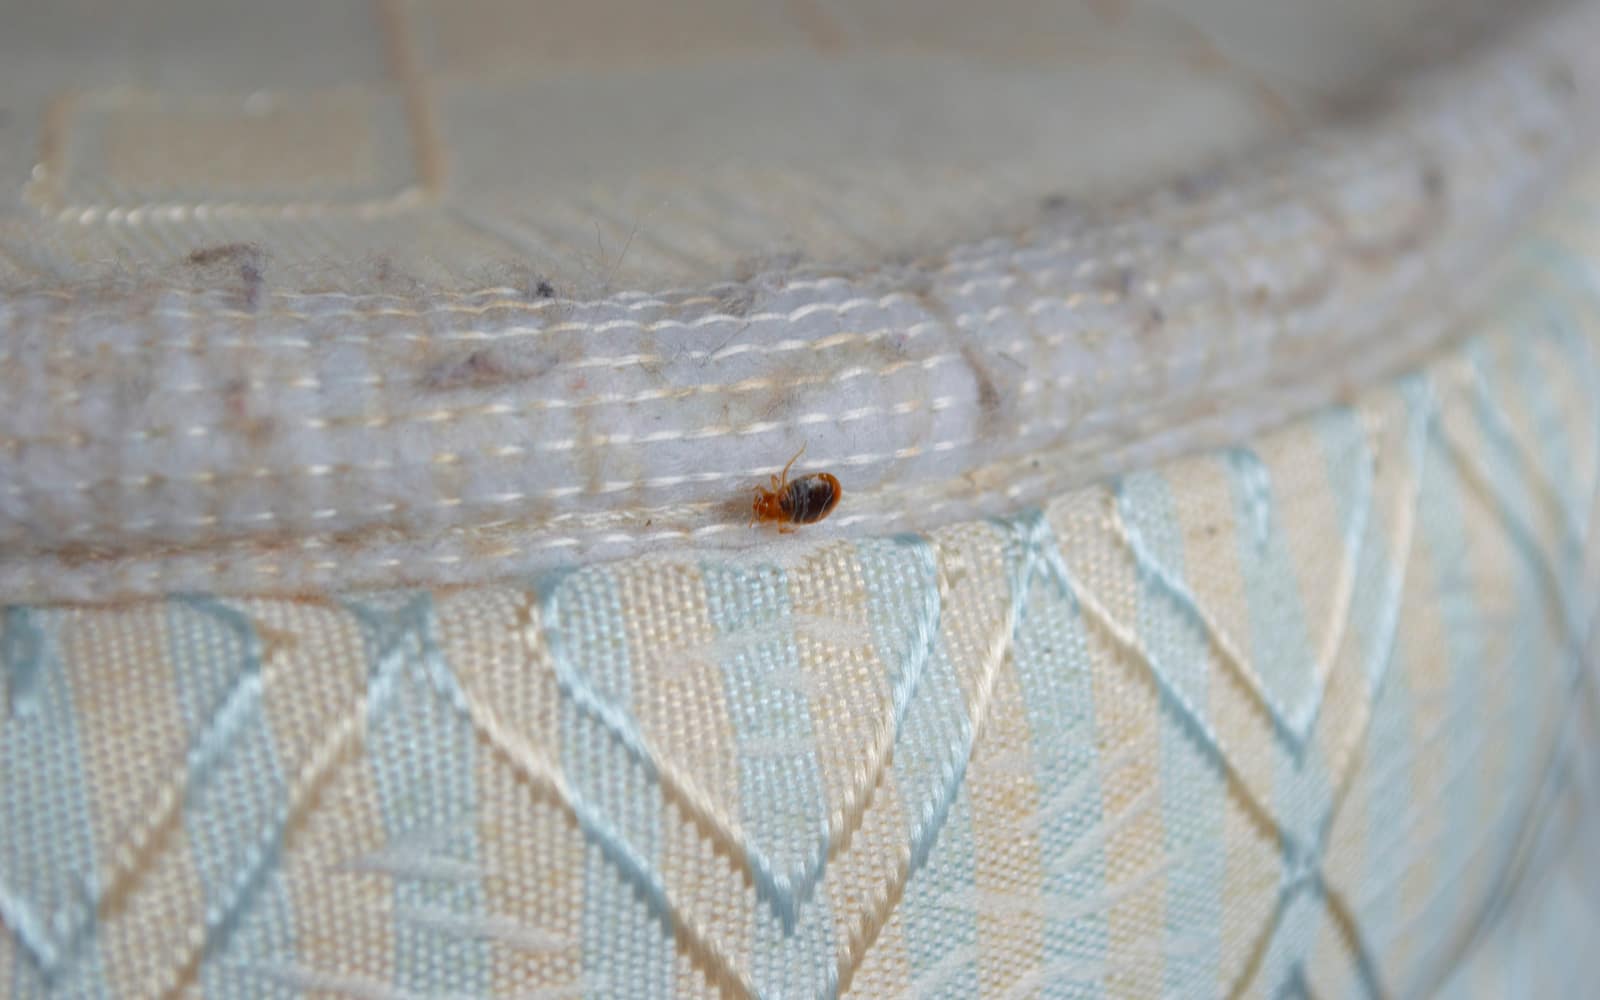 What Do Bed Bugs Look Like On A Mattress